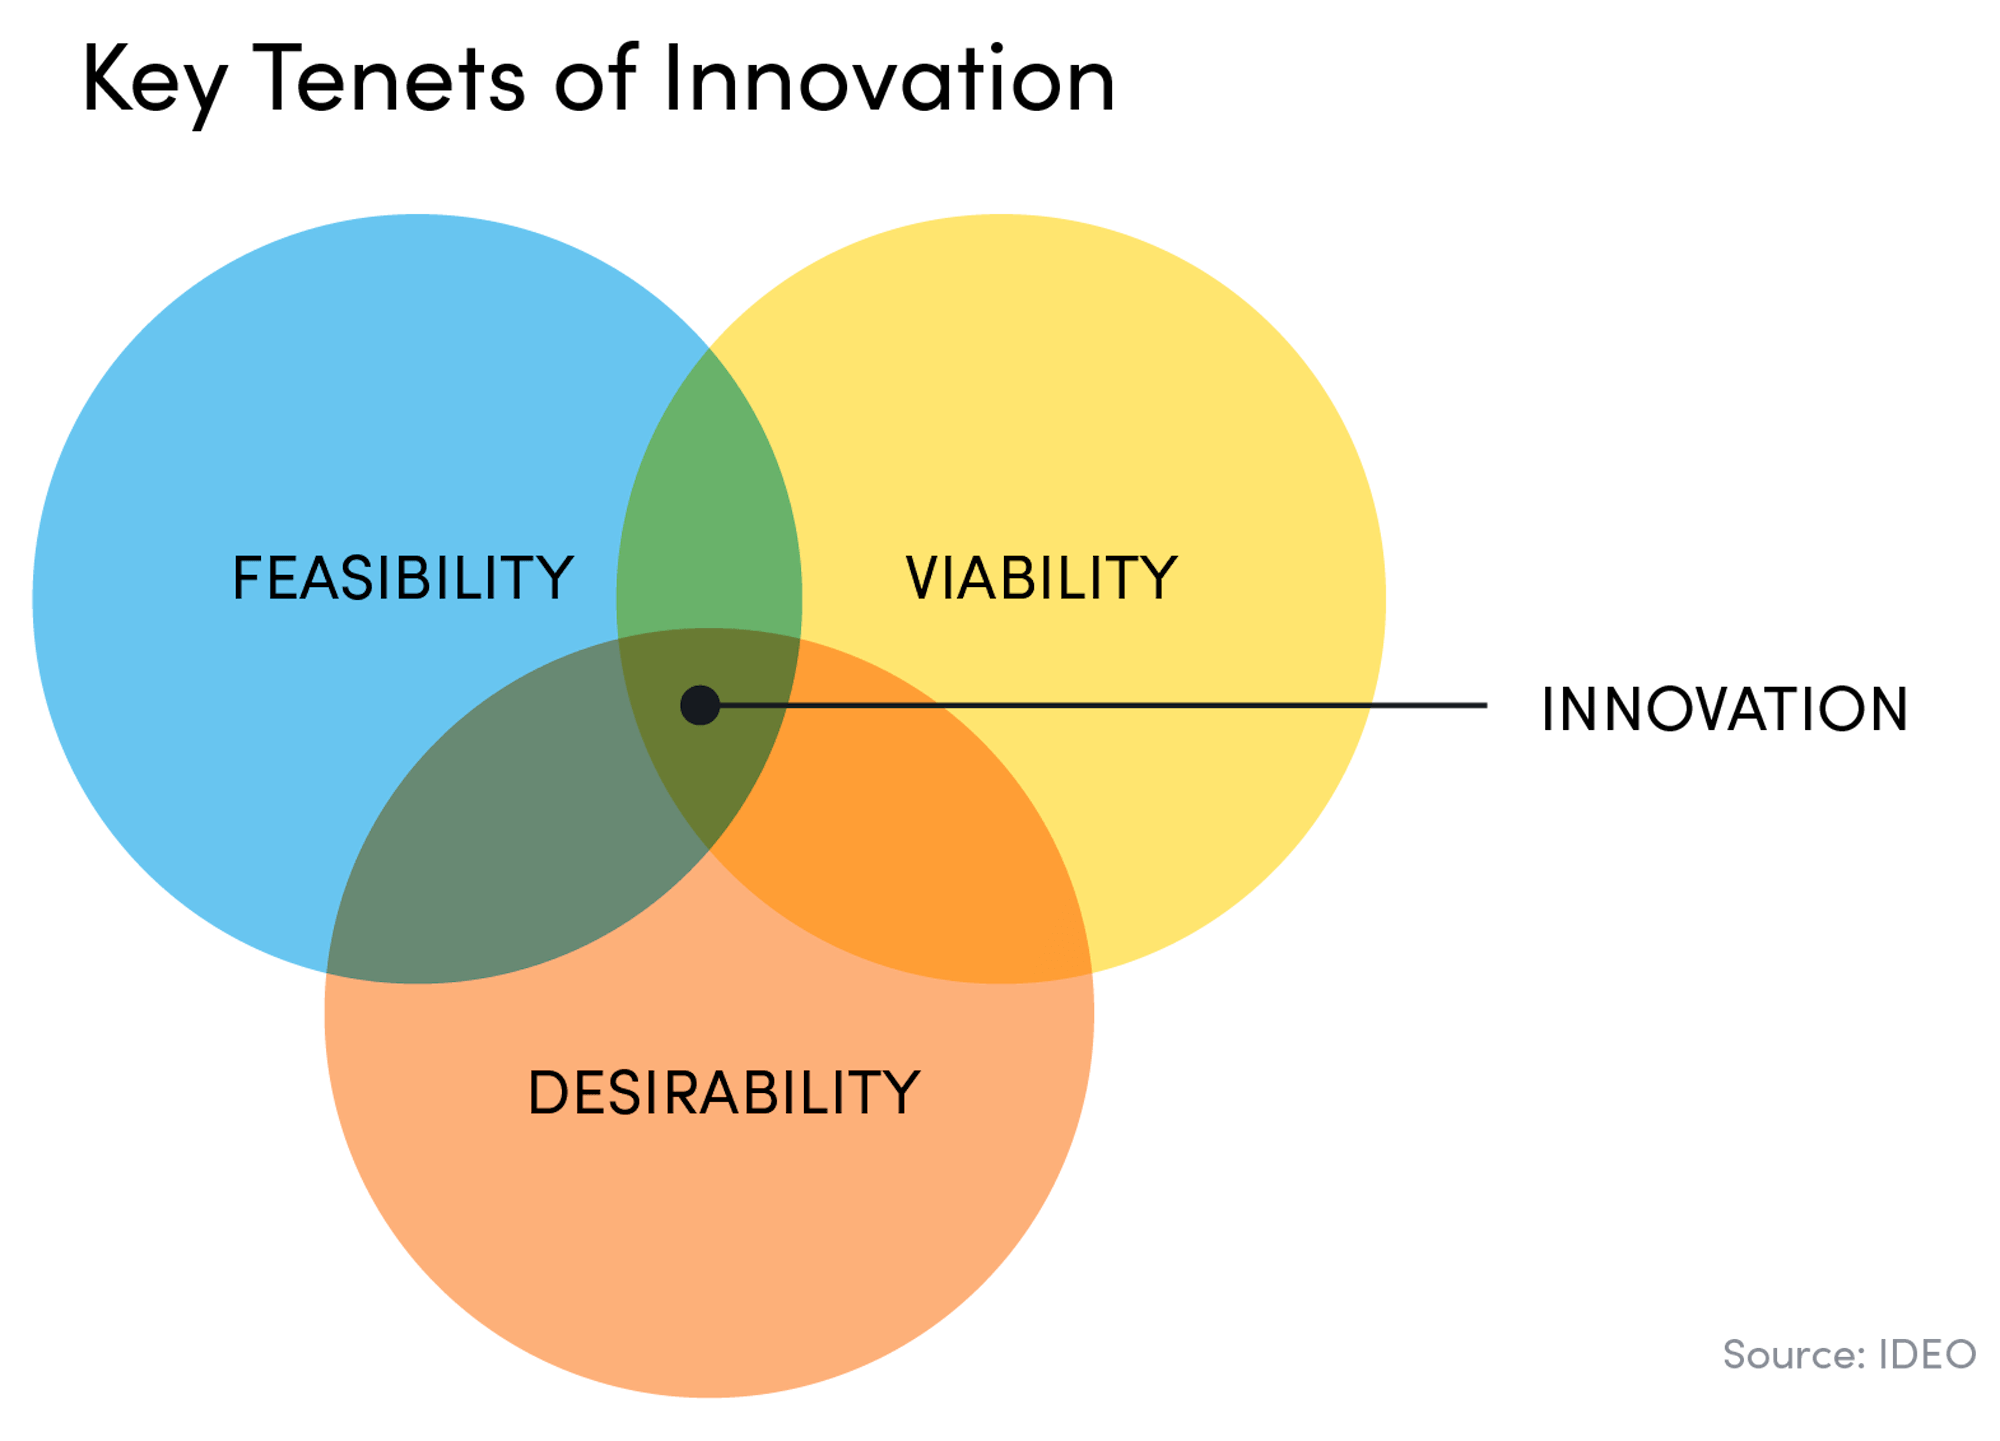 Key tenets of innovation: feasibility, desirability, and viability